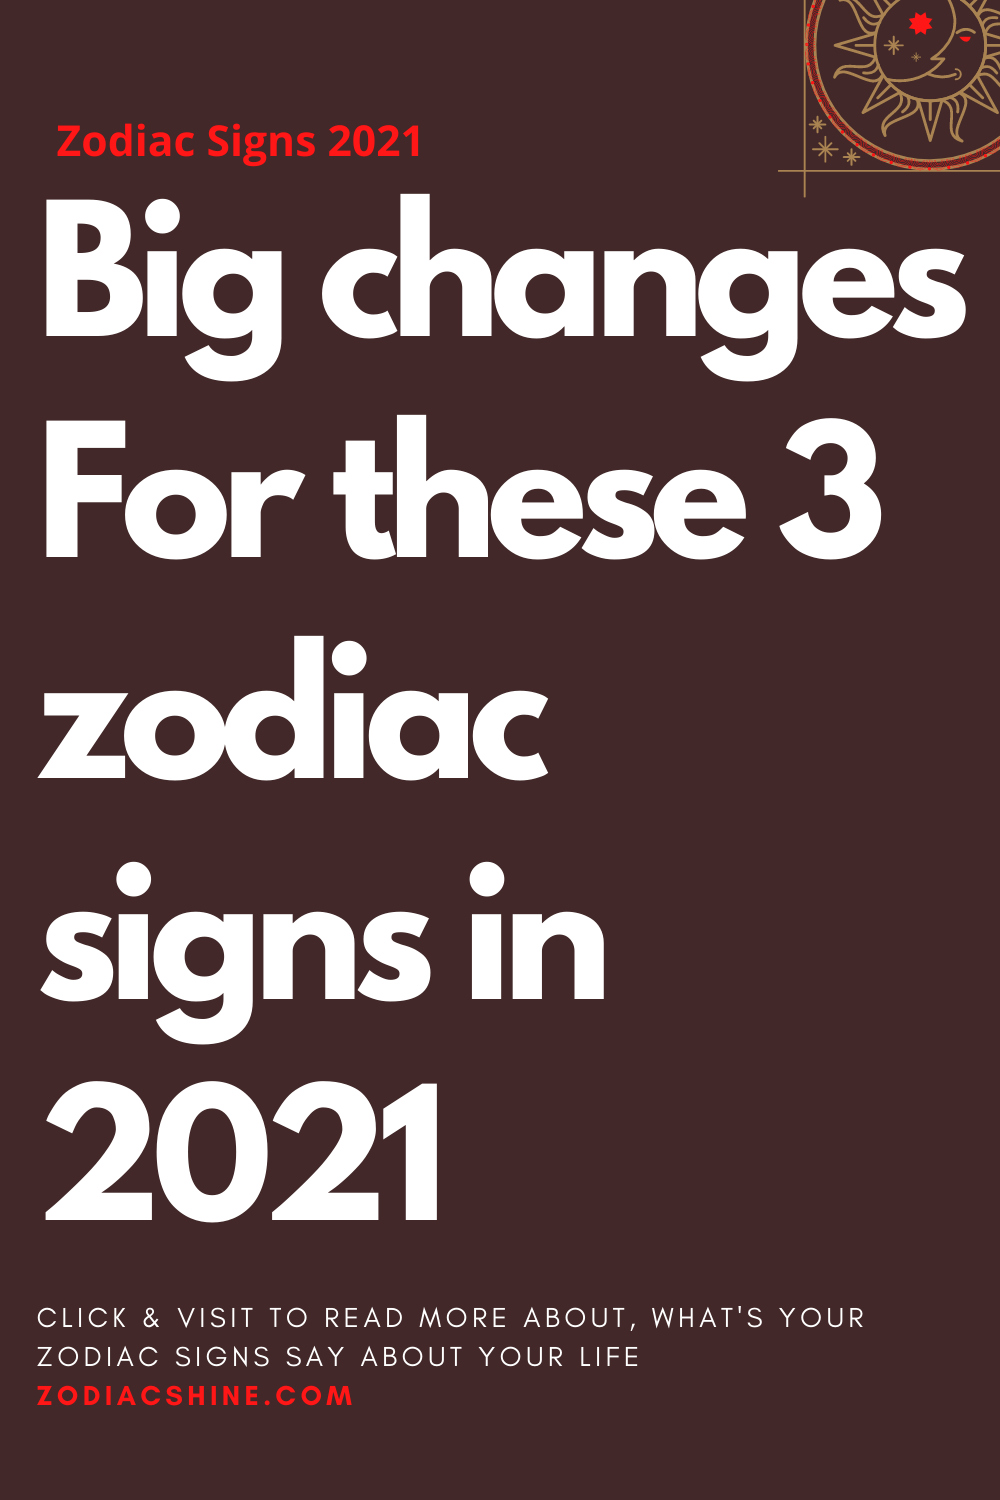 Big changes For these 3 zodiac signs in 2021